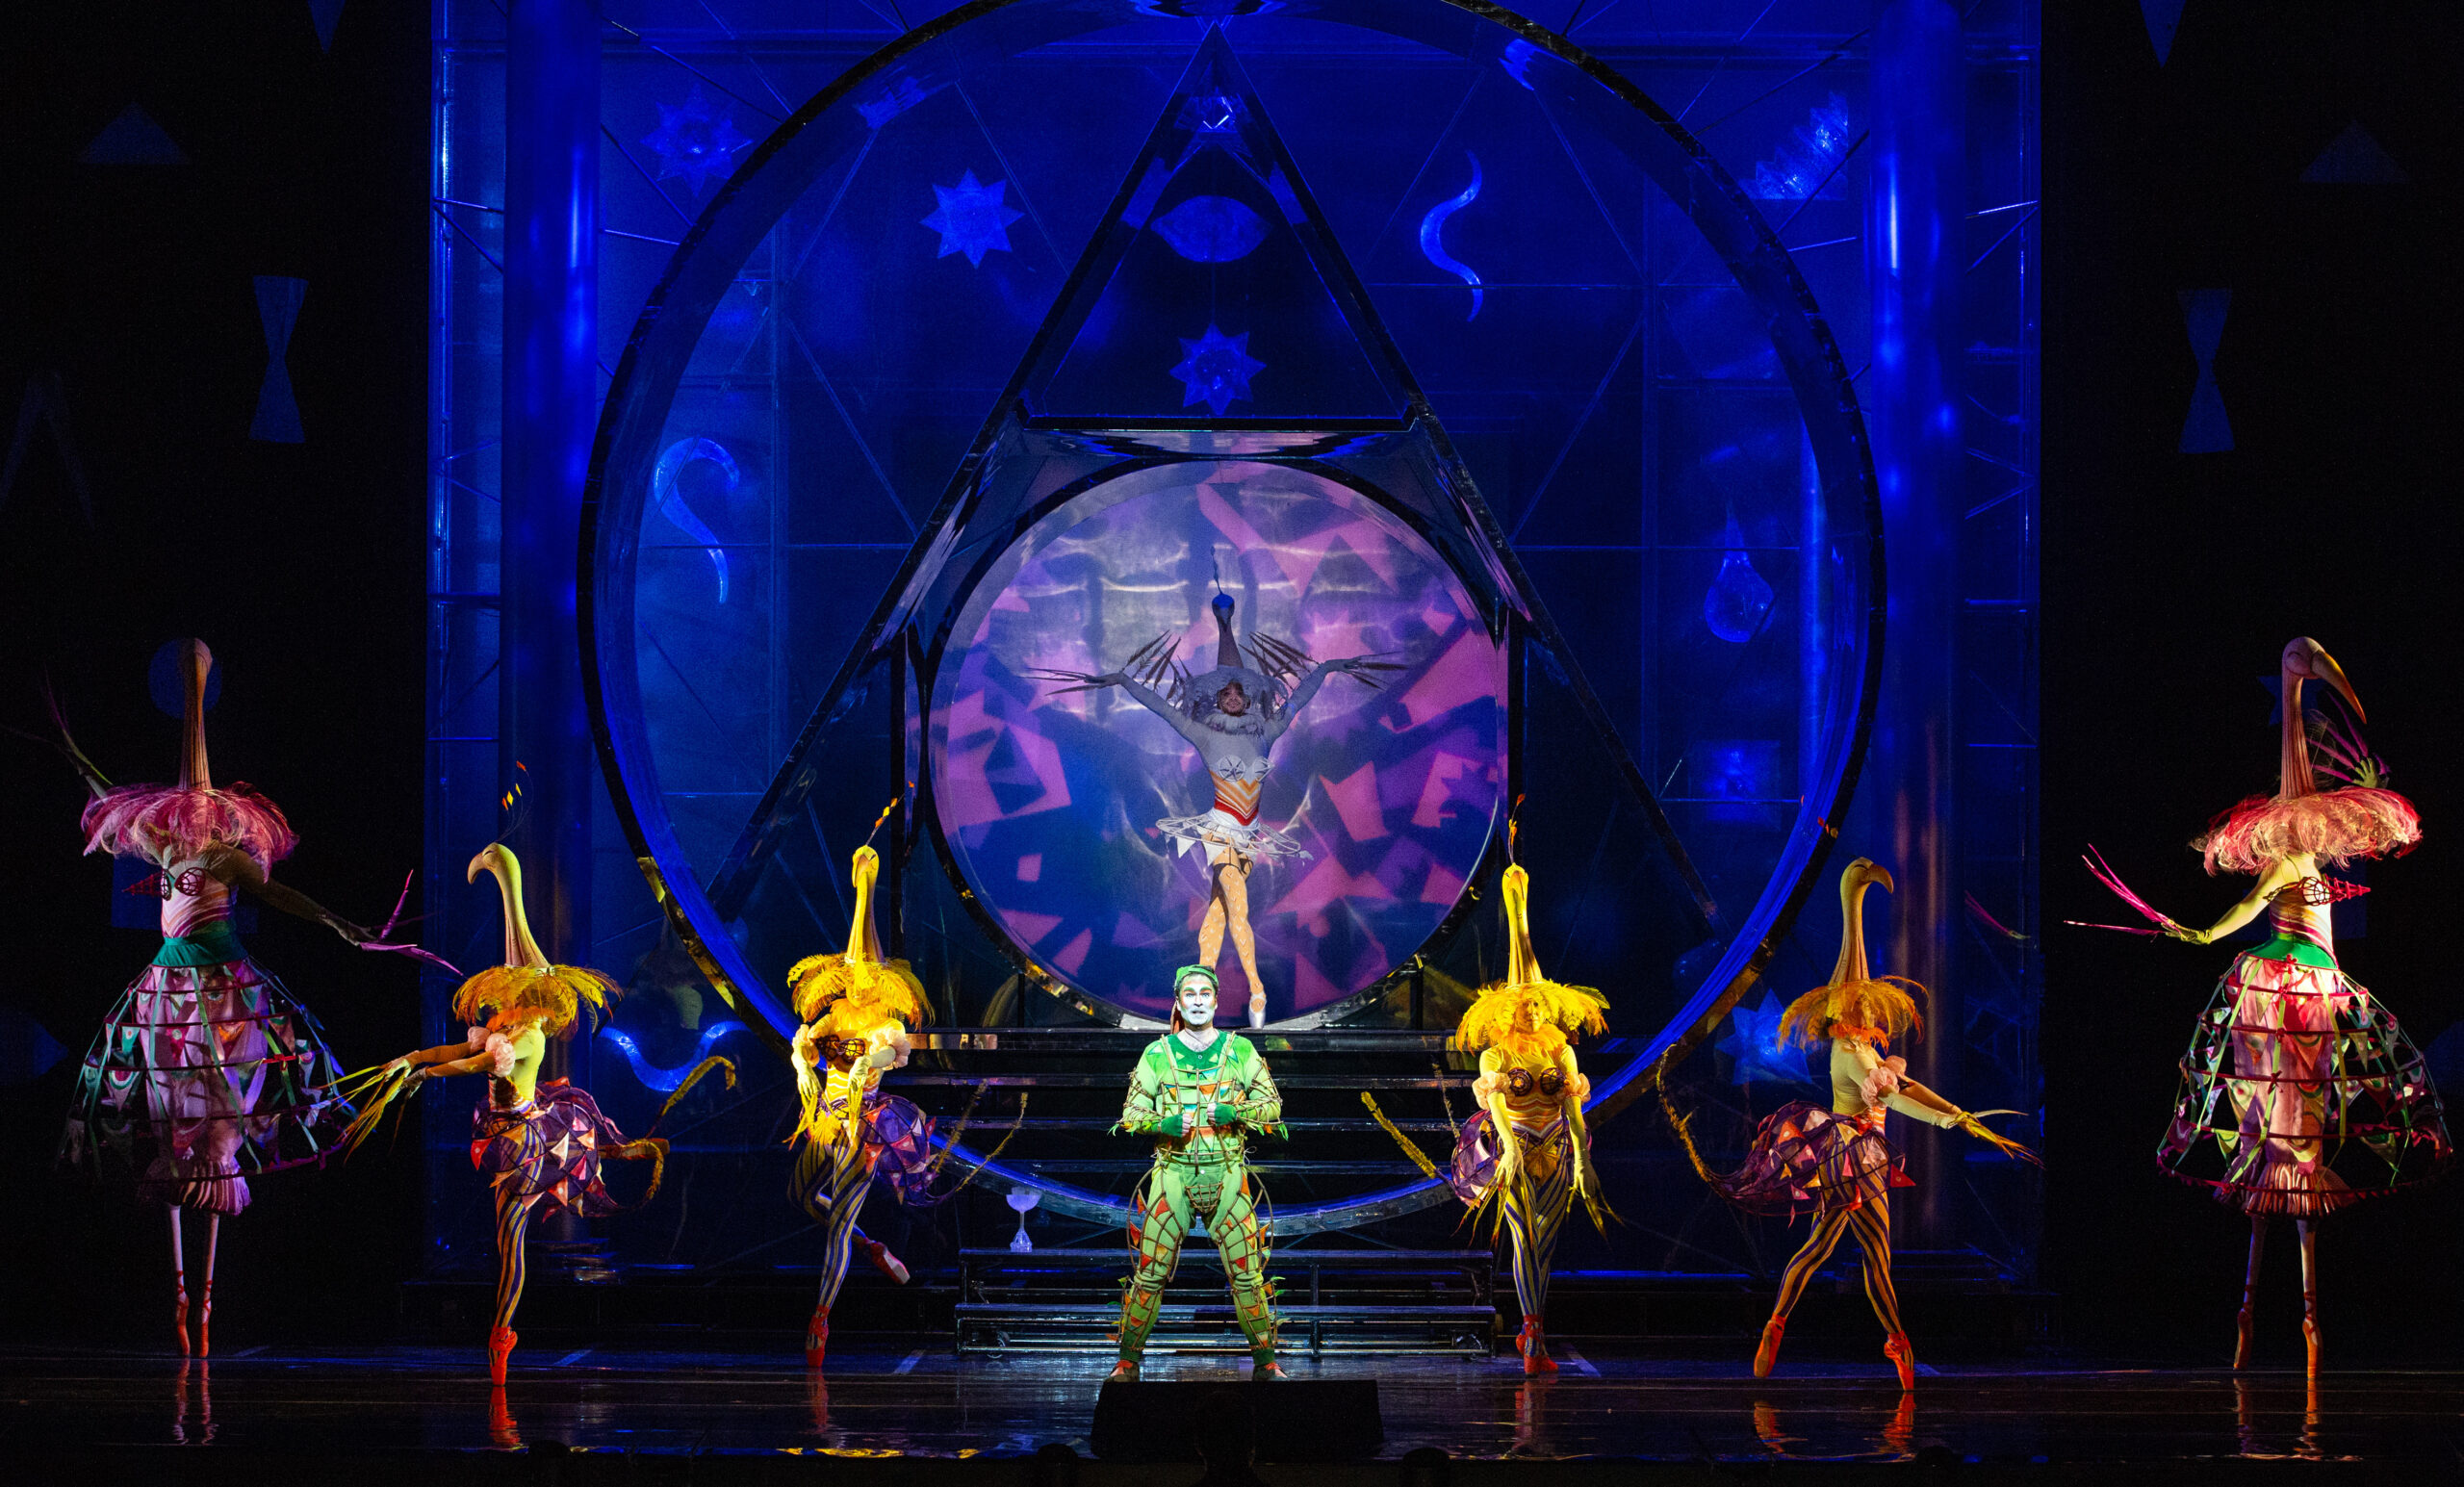 Joshua Hopkins as Papageno in a scene from Mozart's "The Magic Flute." Photo: Marty Sohl / Met Opera